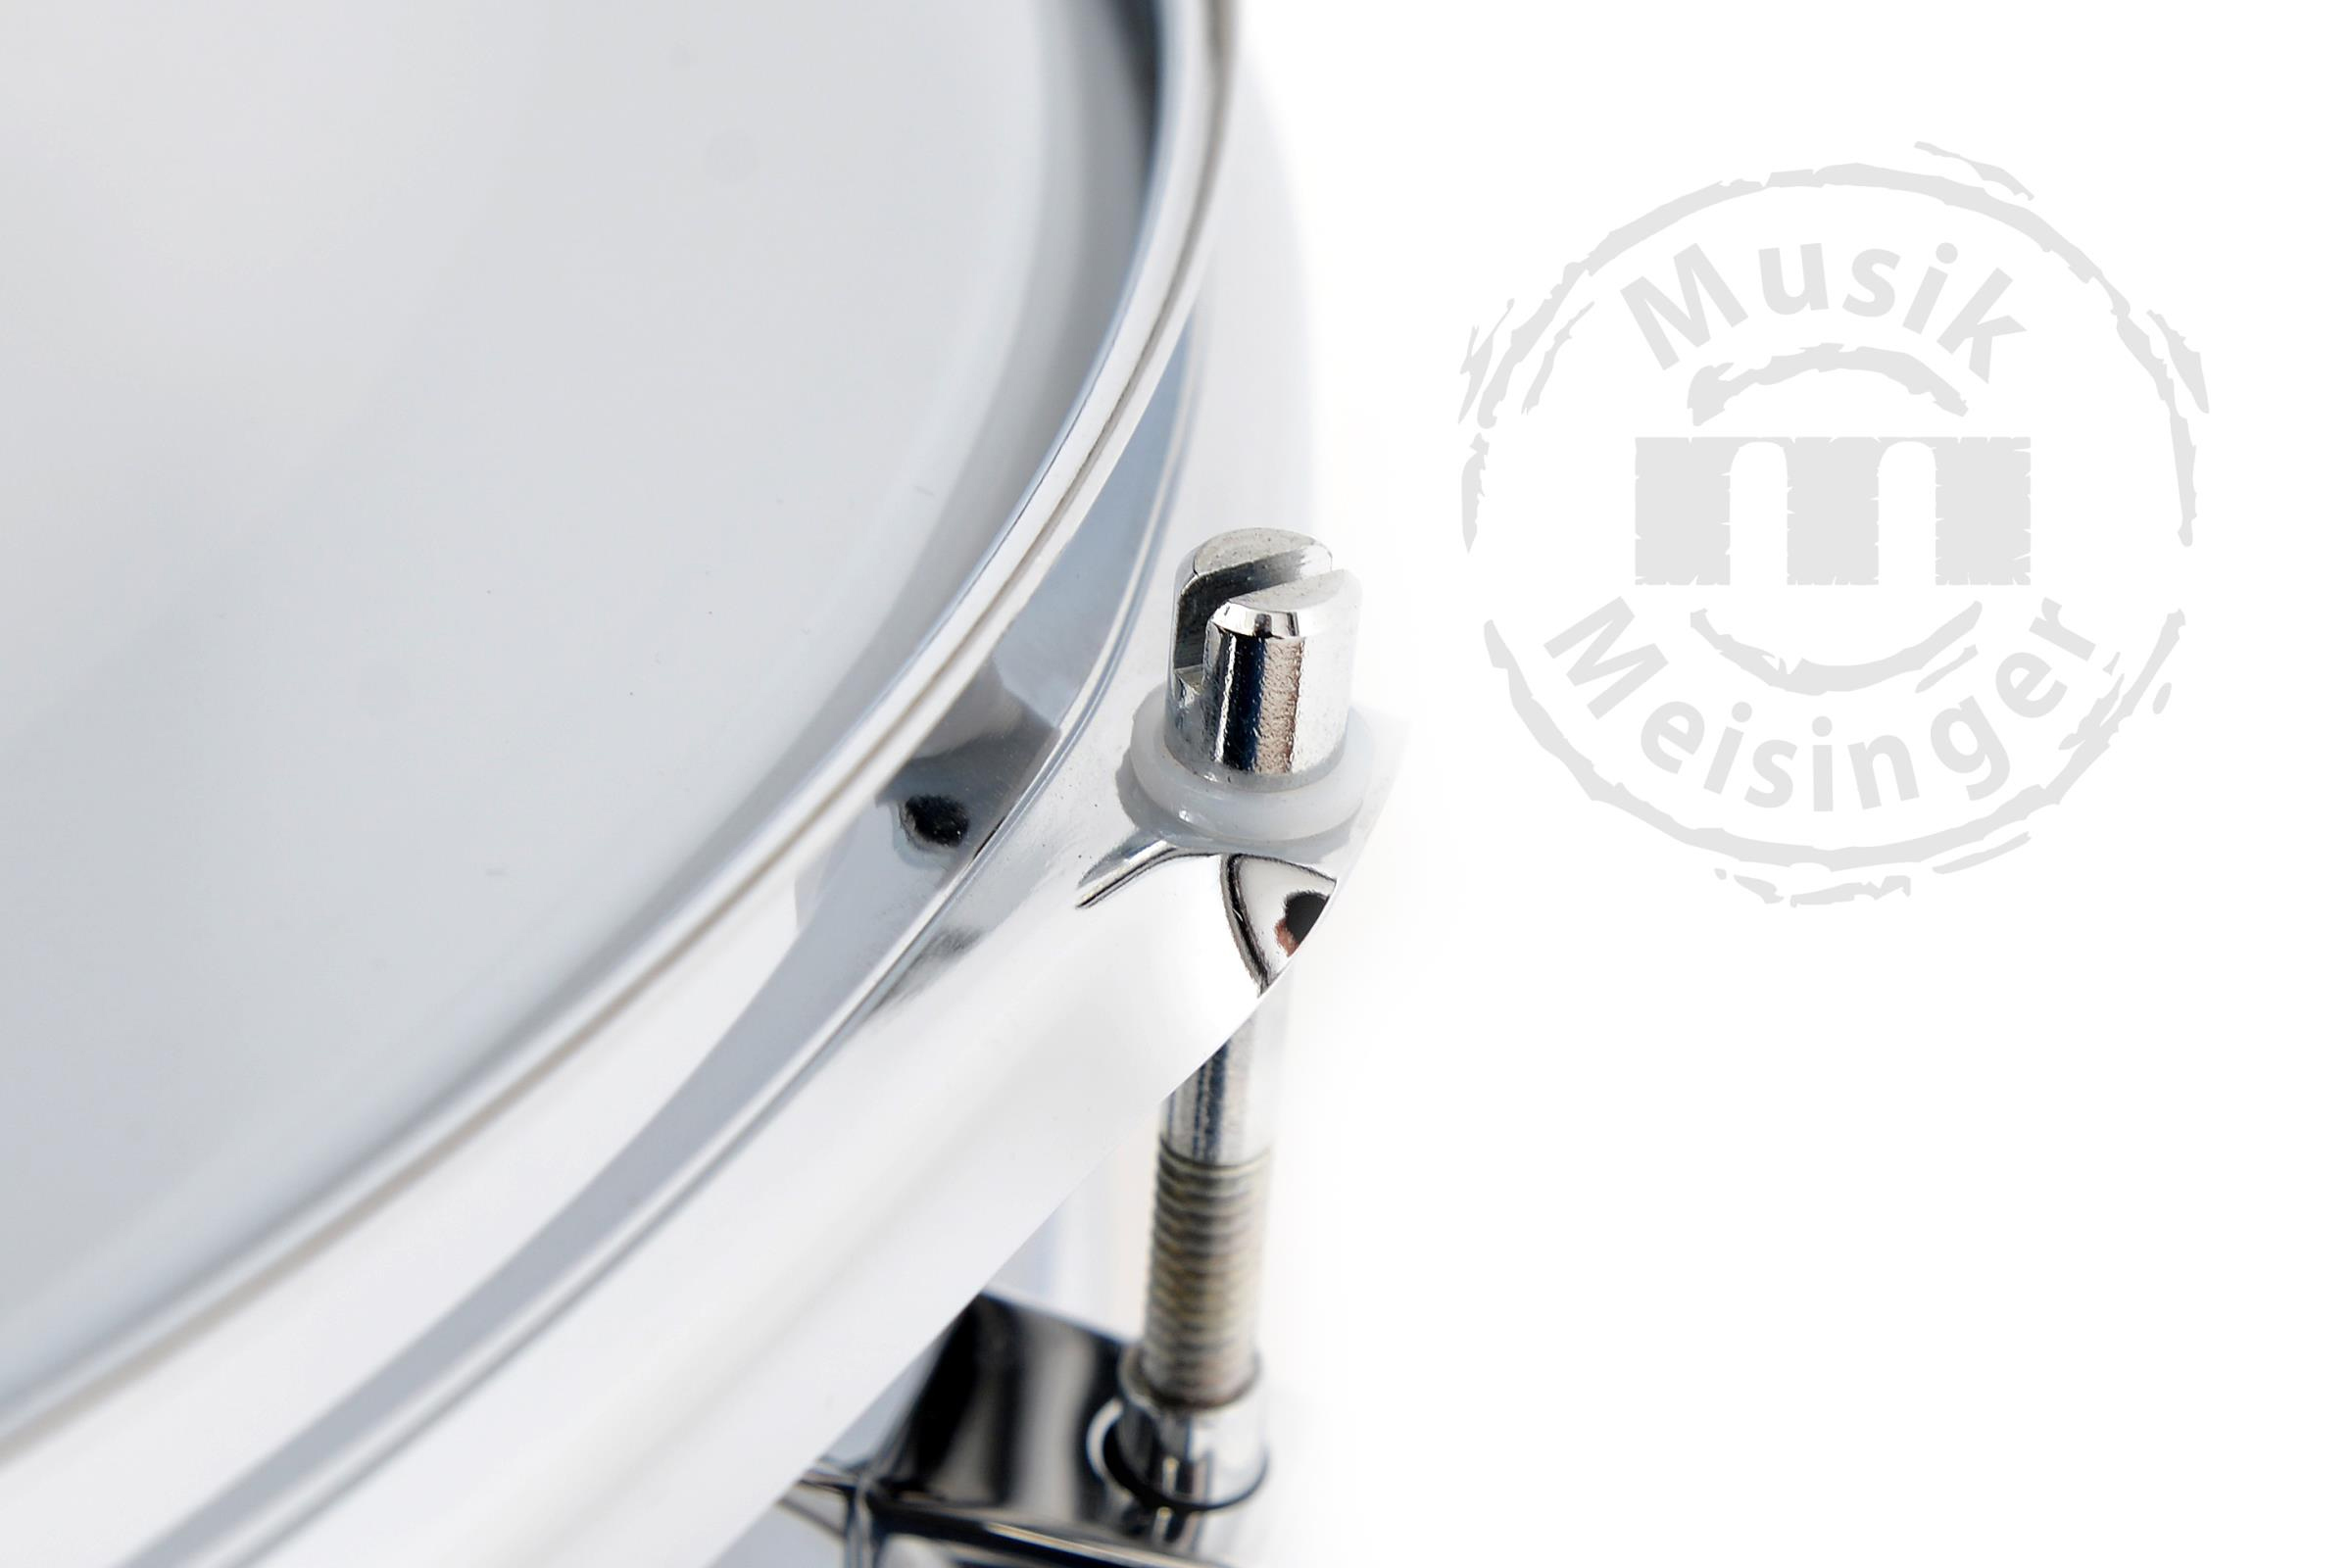 Sonor MP454 Marching Snare Drum